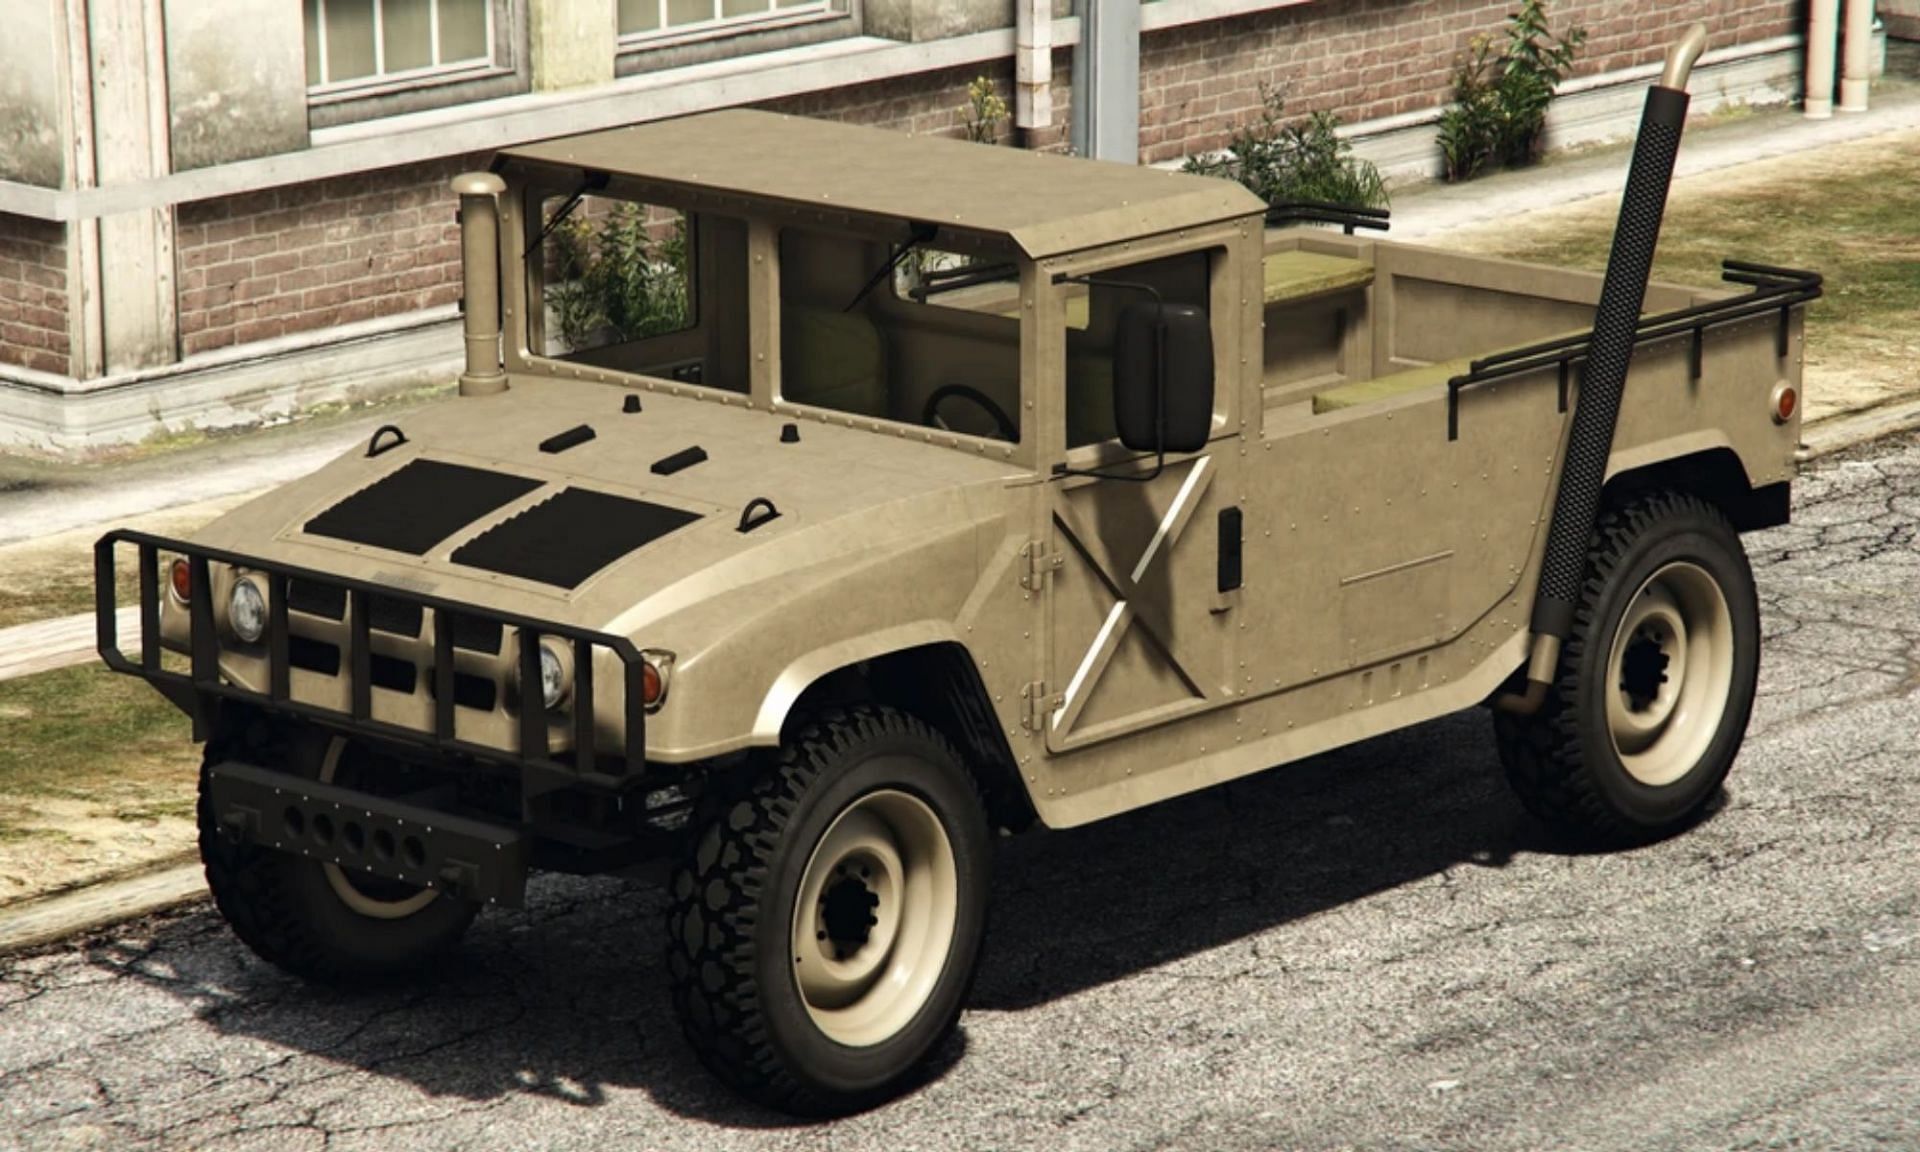 Another view of this vehicle (Image via Rockstar Games)